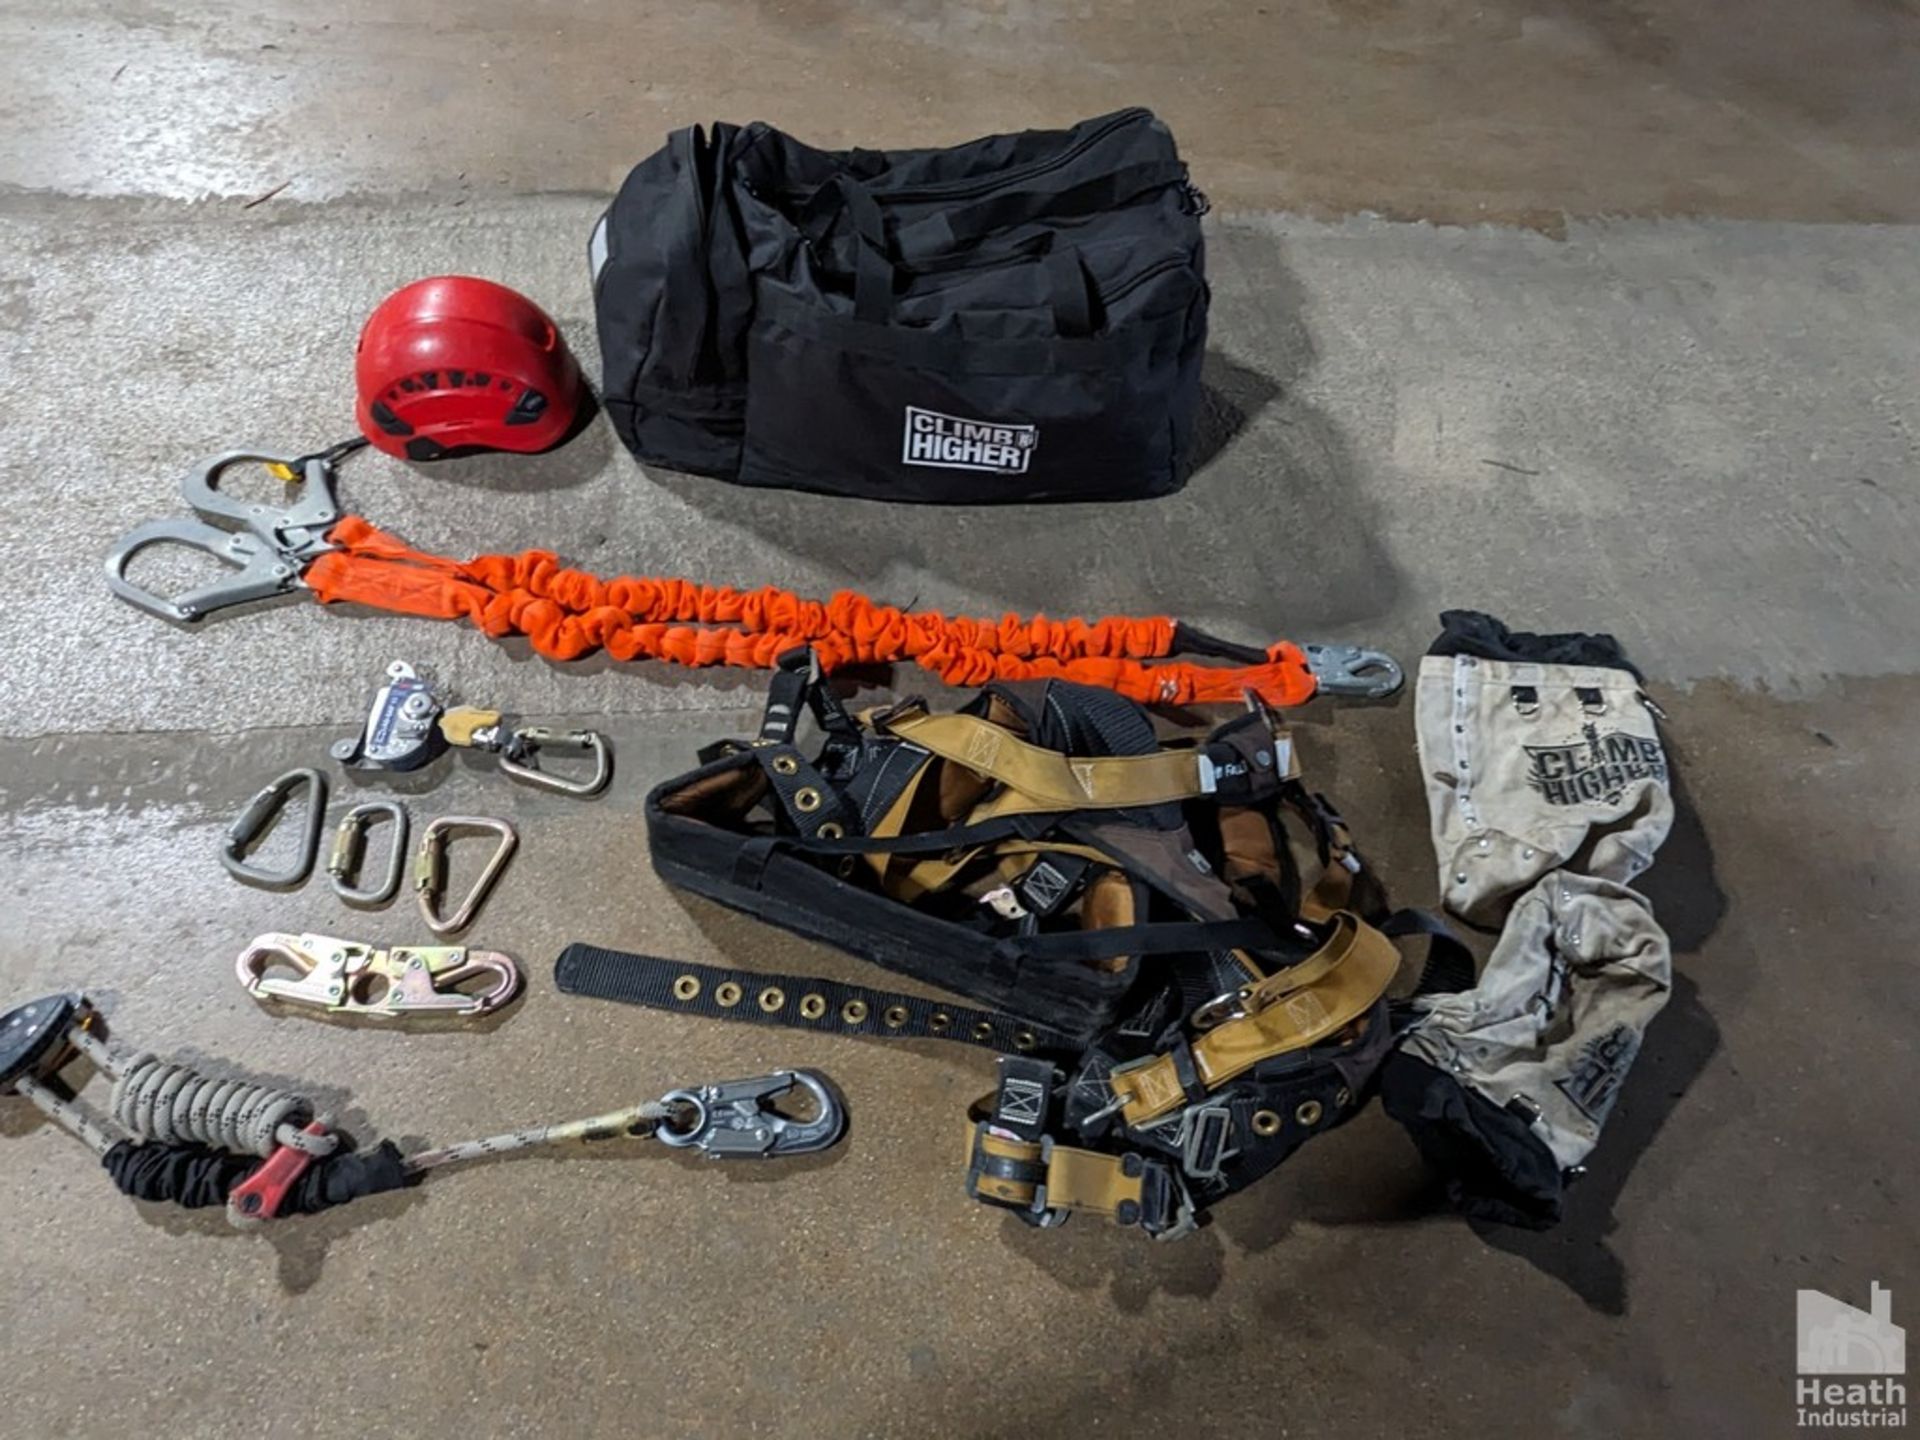 CLIMB HIGHER CLIMBING KIT: HARNESS, HELMET, CABLE SAFETY SLEEVE, BOLT BAGS, LANYARDS, SPREADER